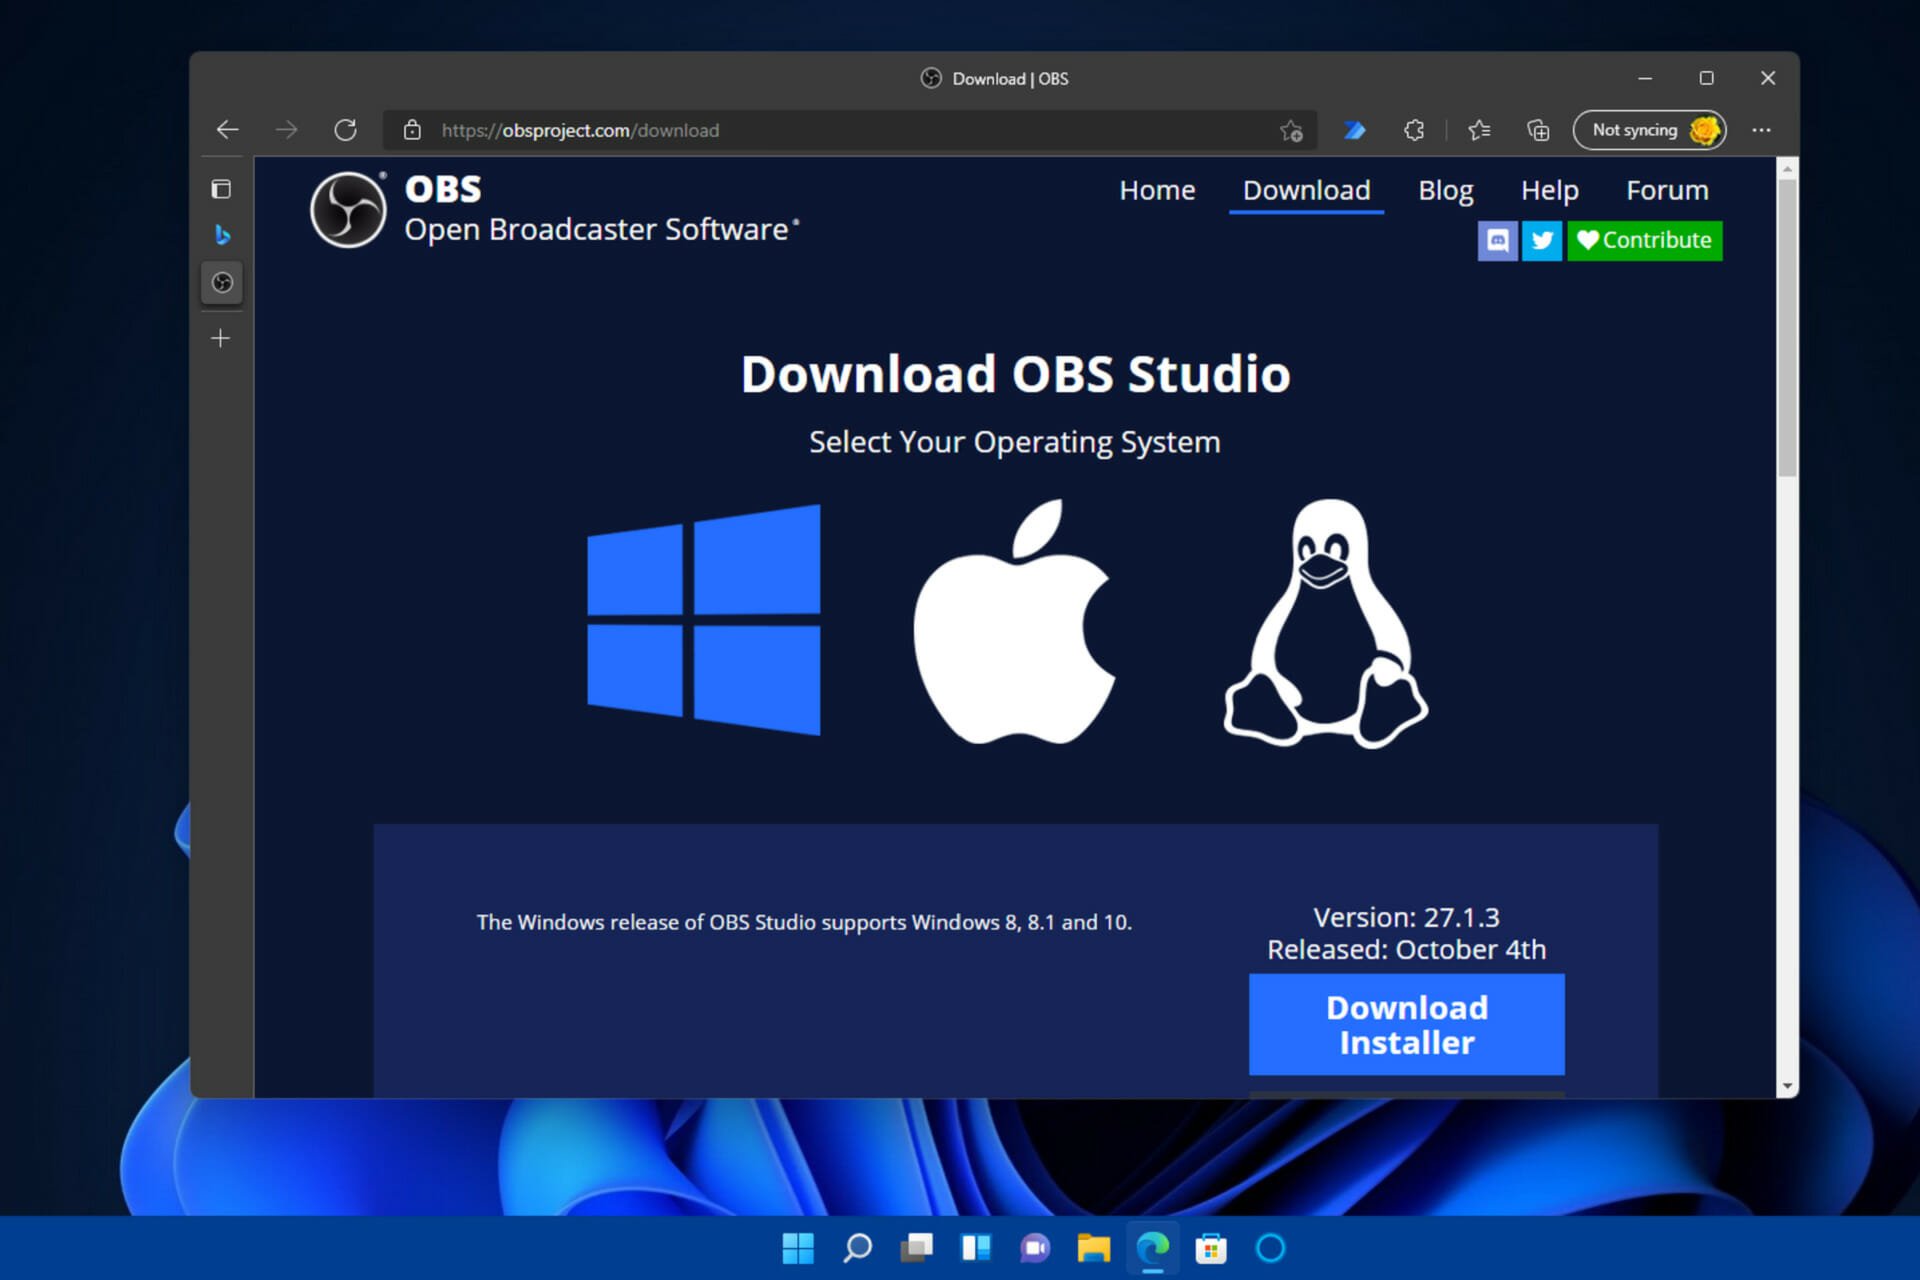 OBS Studio for Windows 11: How to Download, Install & Use